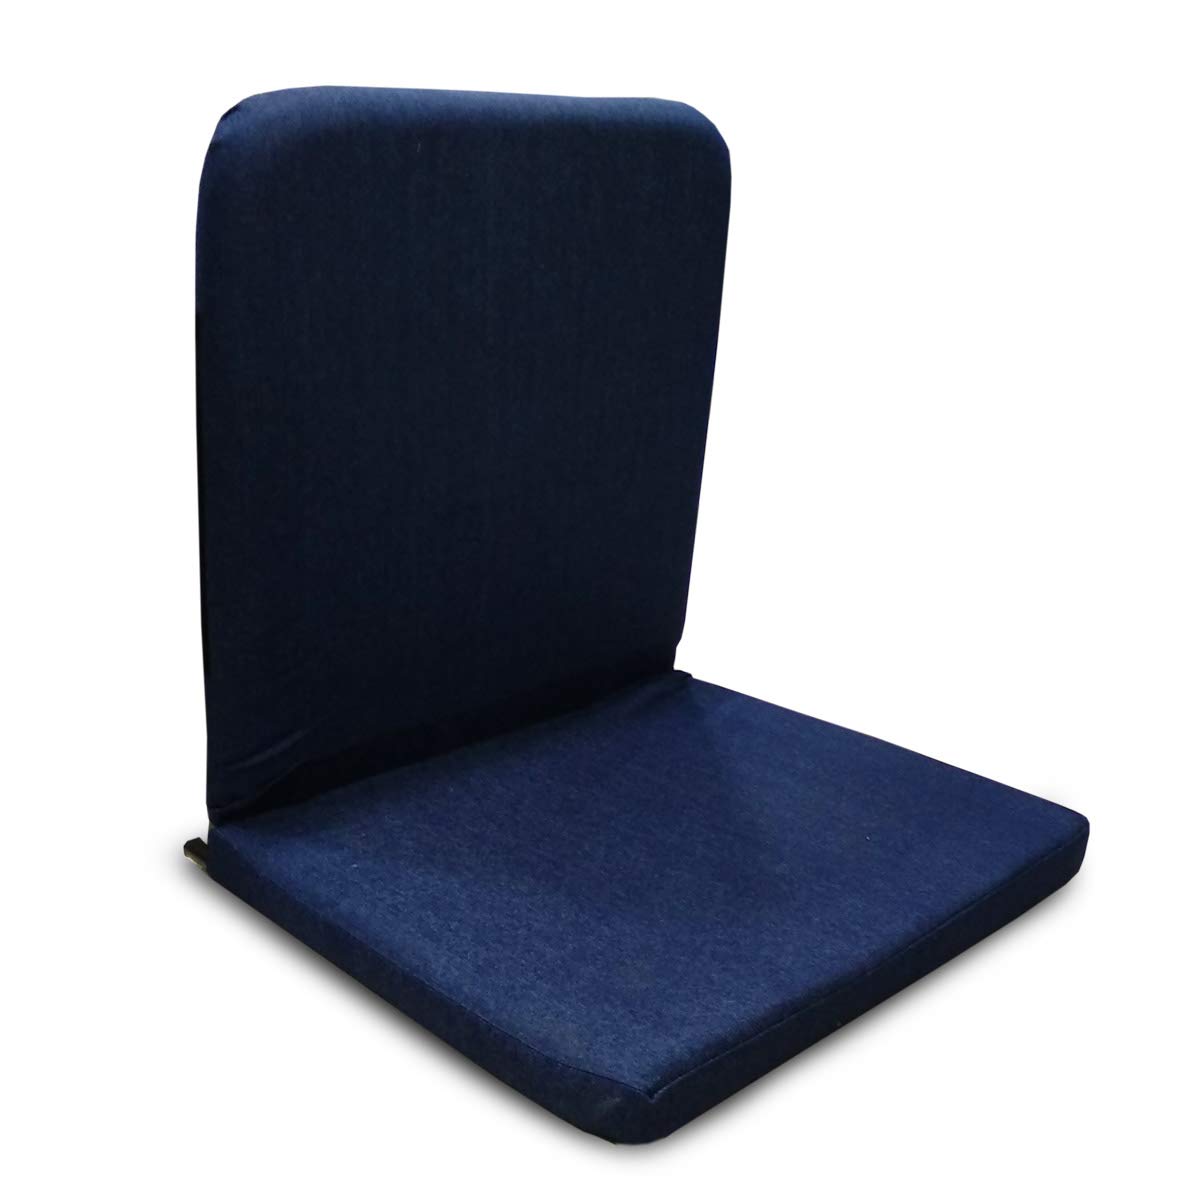 MEDITATION CHAIR WITH CUSHION FOLDABLE LIGHTWEIGHT PORTABLE BACK SUPPO